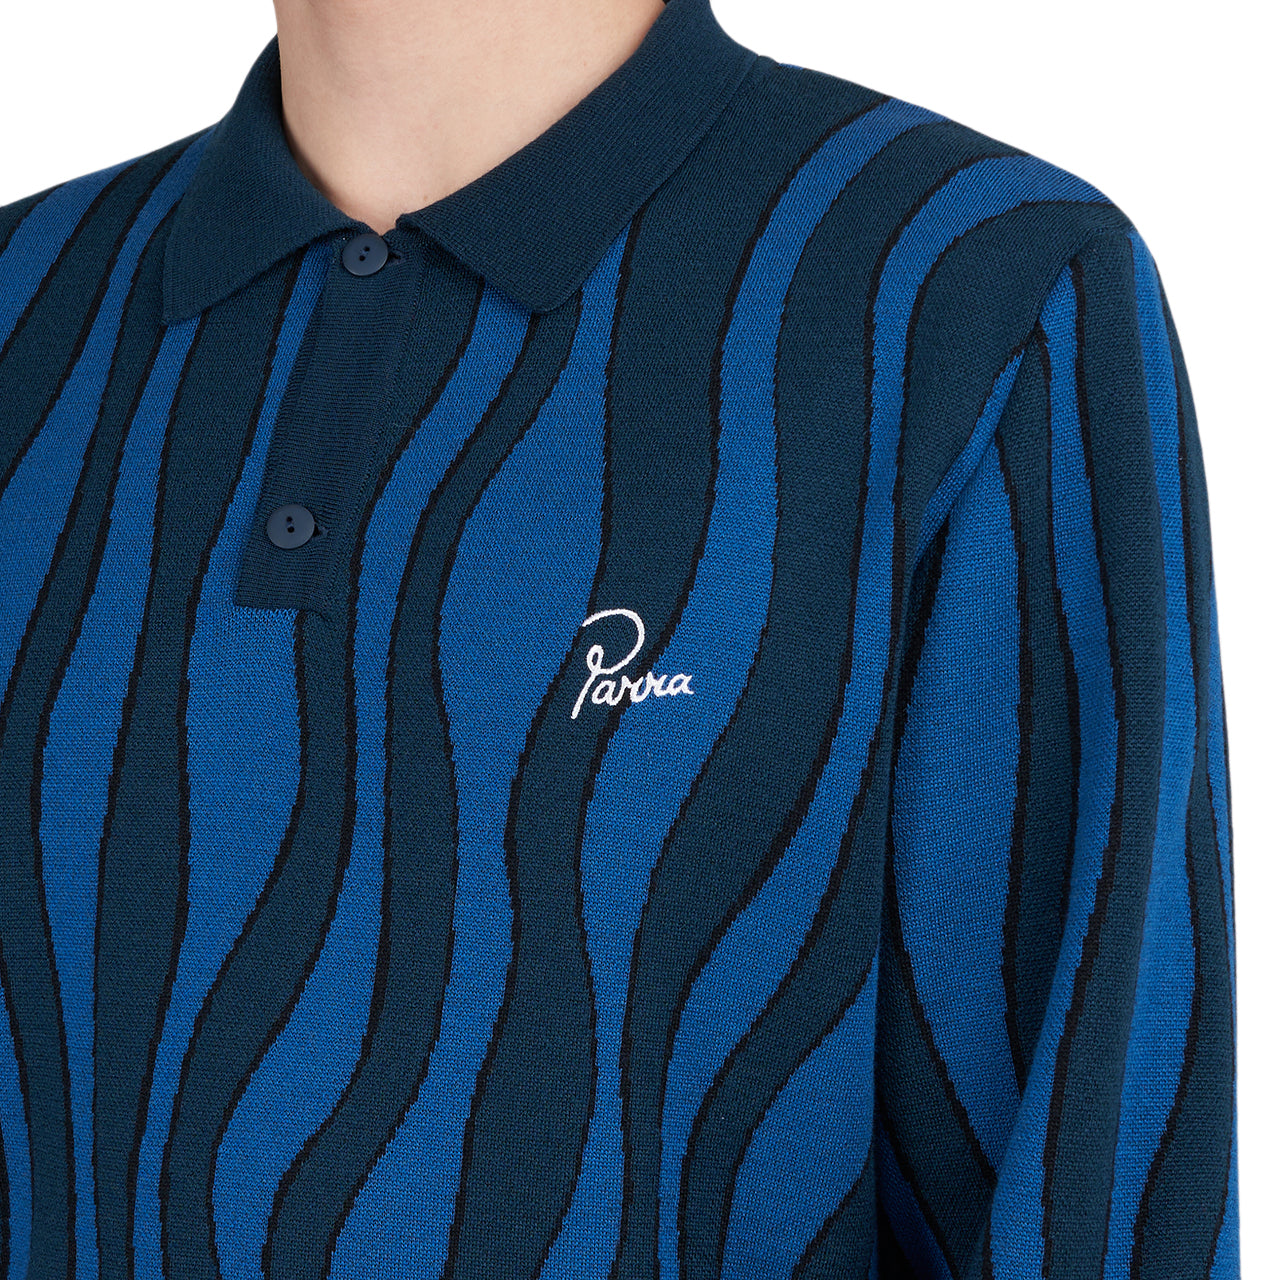 Parra Aqua Weed Waves Knitted Polo Shirt (Multi)  - Allike Store